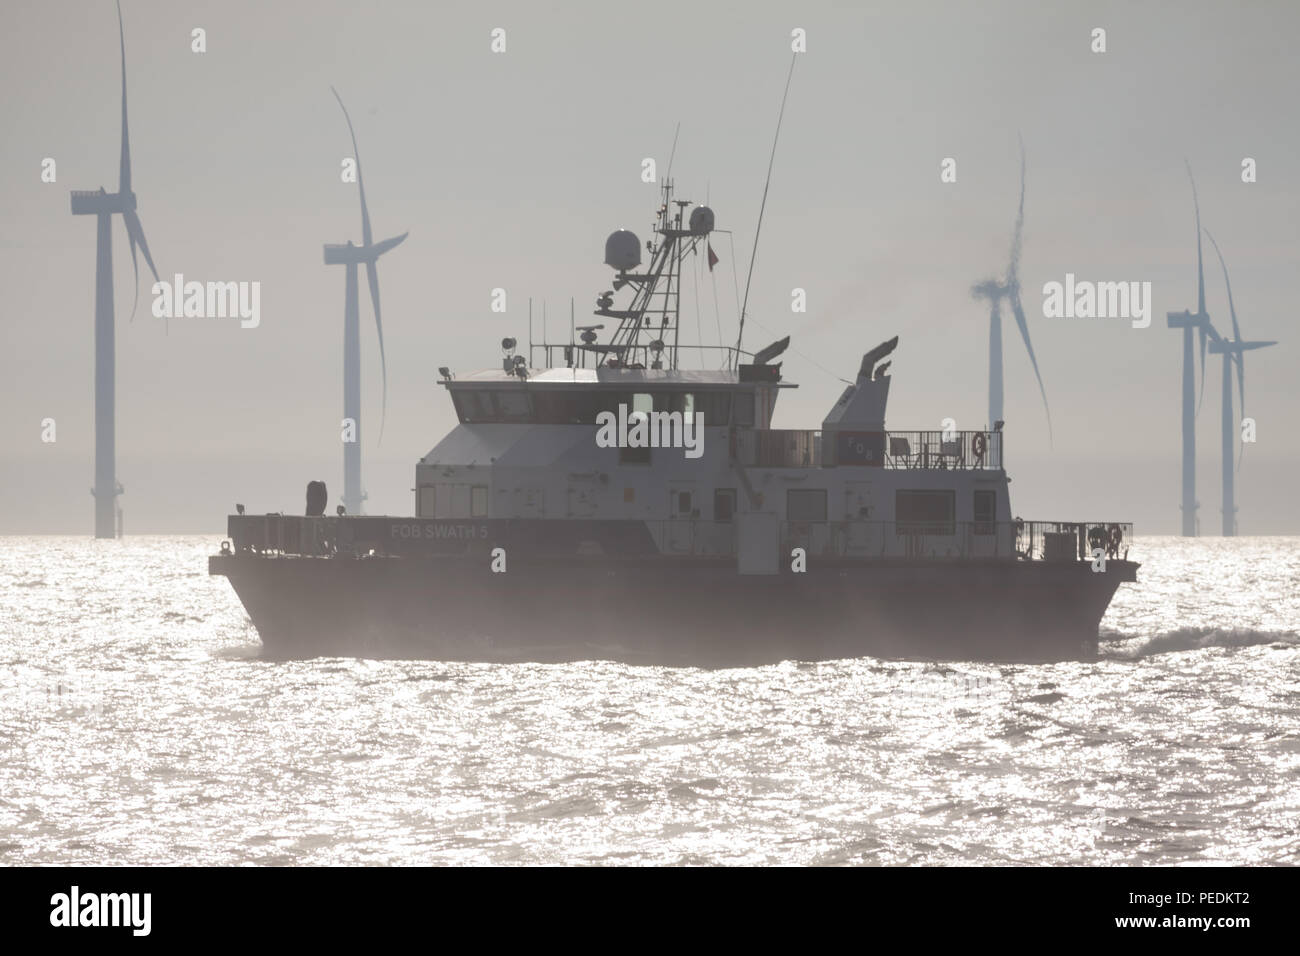 The crew transfer vessel Fob Swath 5 working on the Race Bank Offshore wind farm in the Southern North Sea Stock Photo